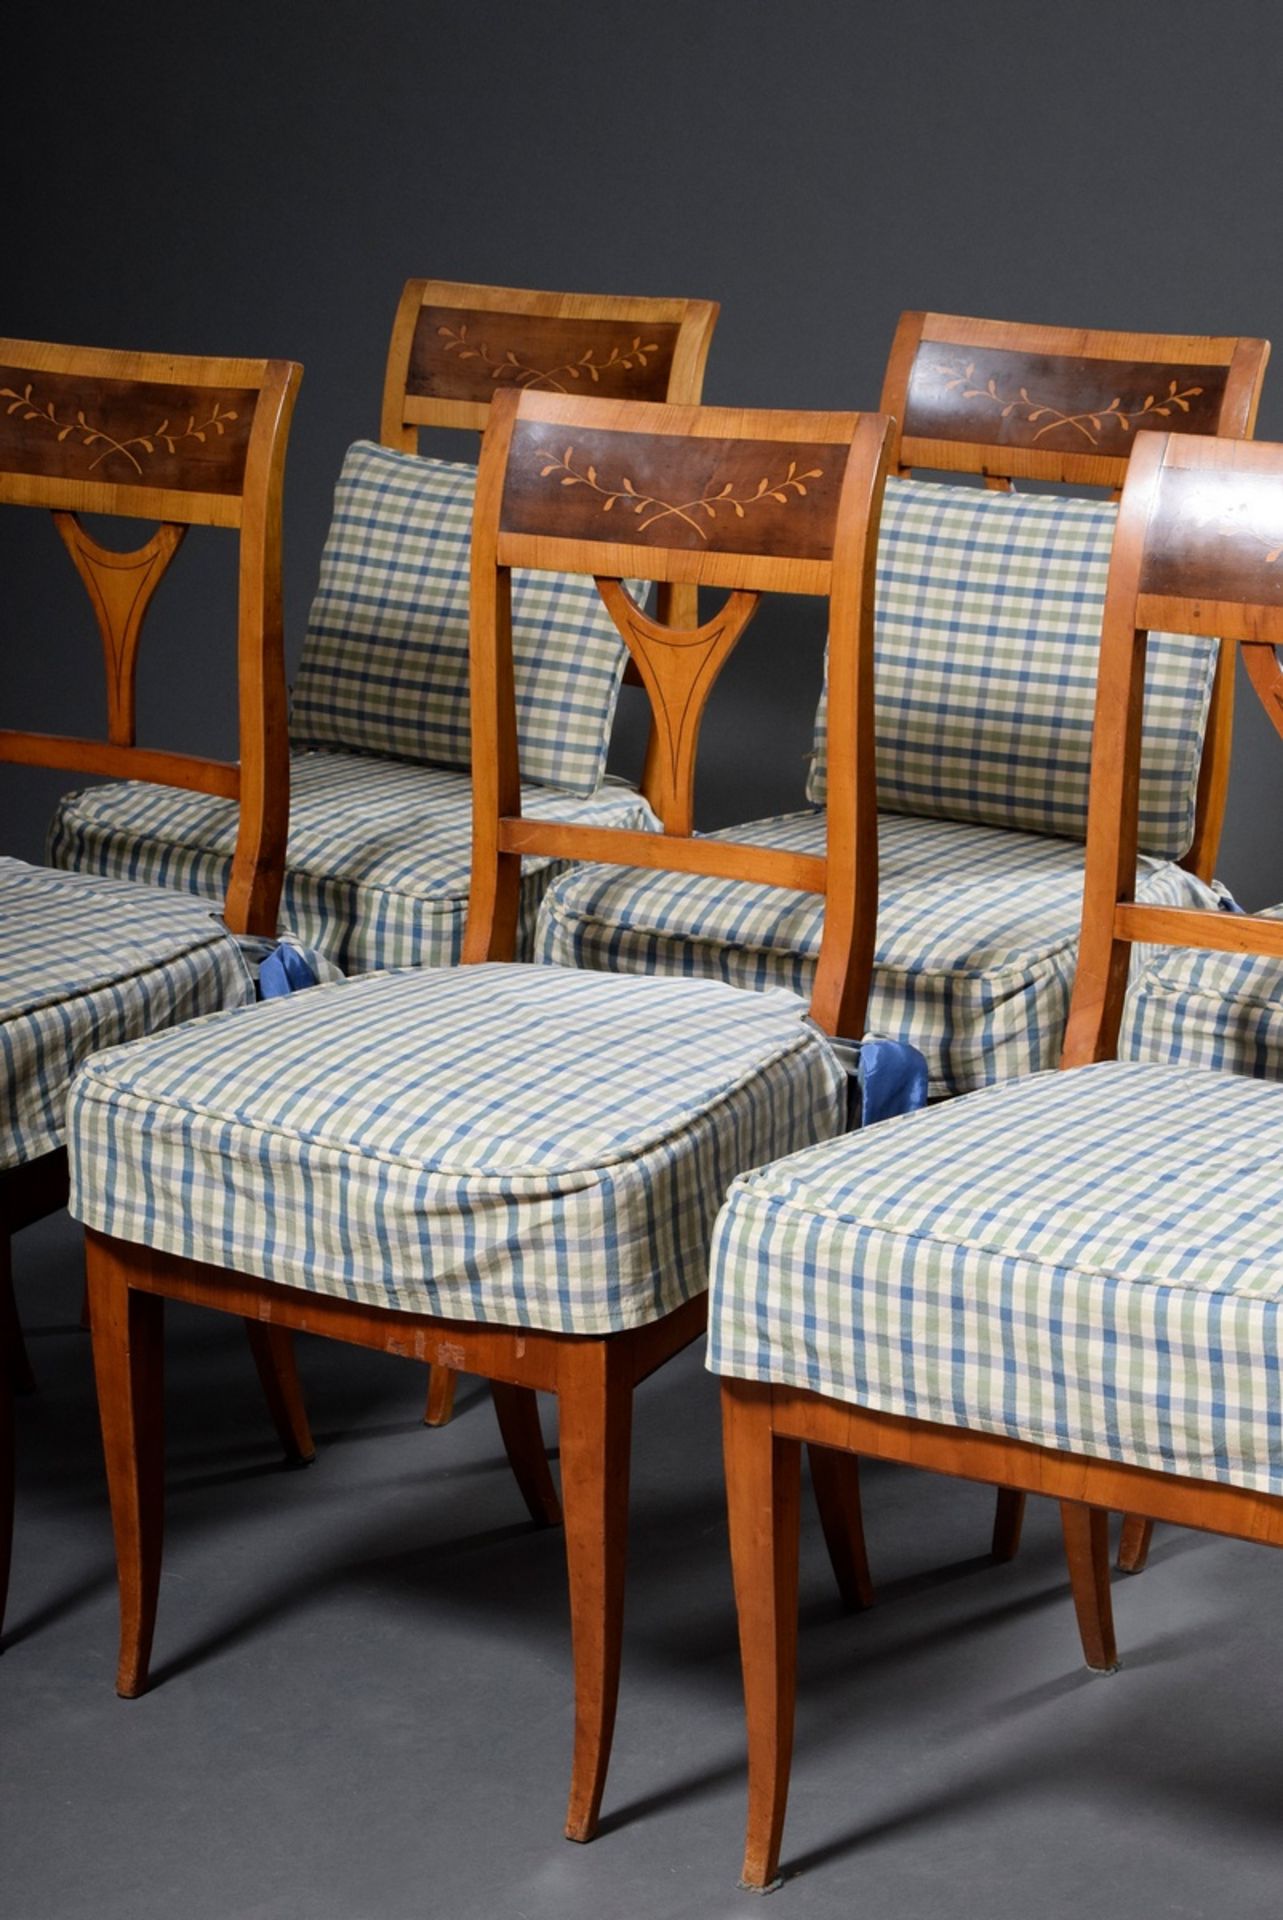 6 Biedermeier chairs on sabre legs with floral inlays in the backrest, plus: removable covers and 3